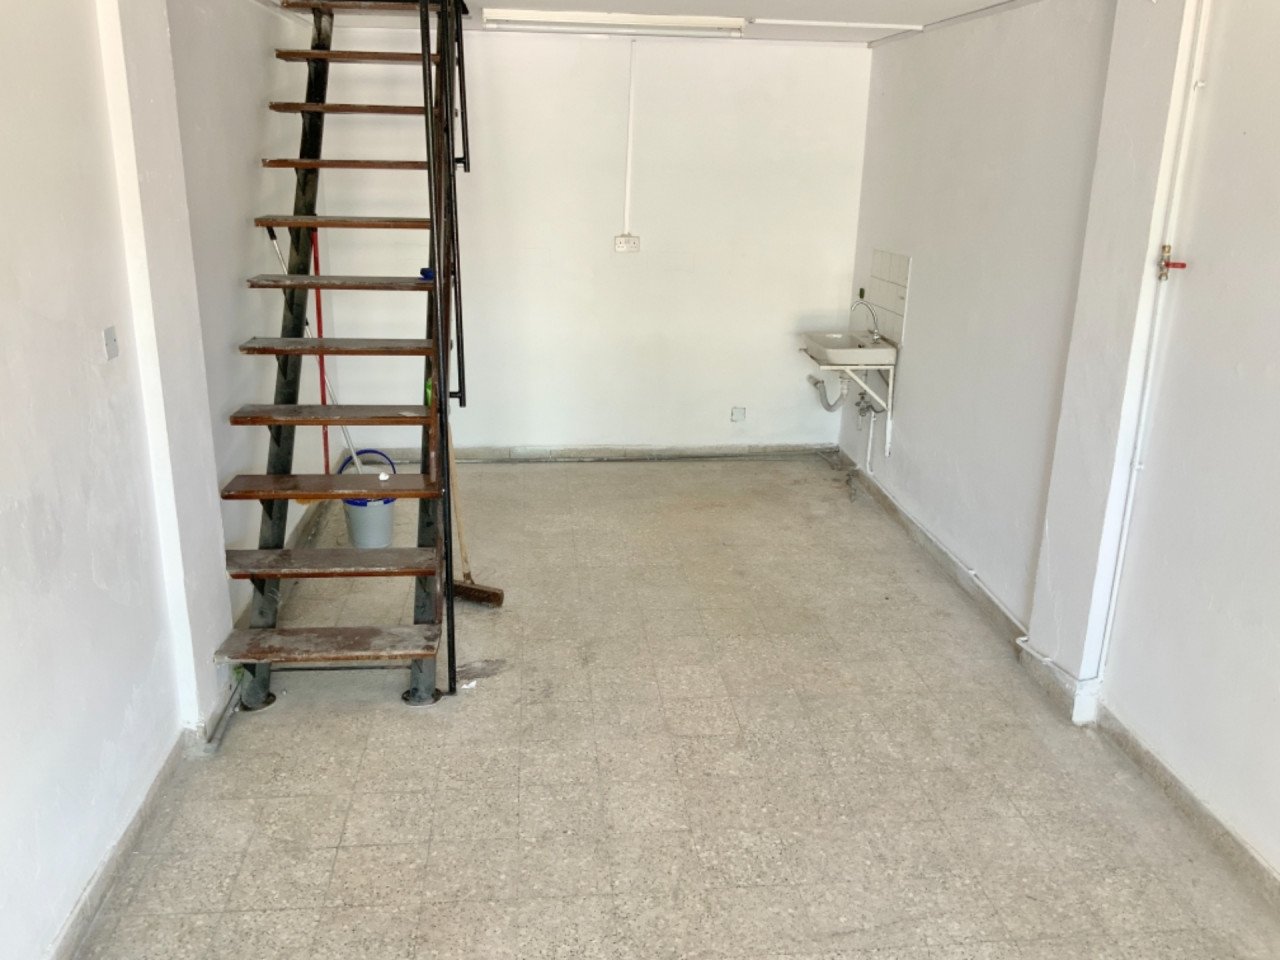 Property for Rent: Commercial (Shop) in Agios Andreas, Nicosia for Rent | Key Realtor Cyprus